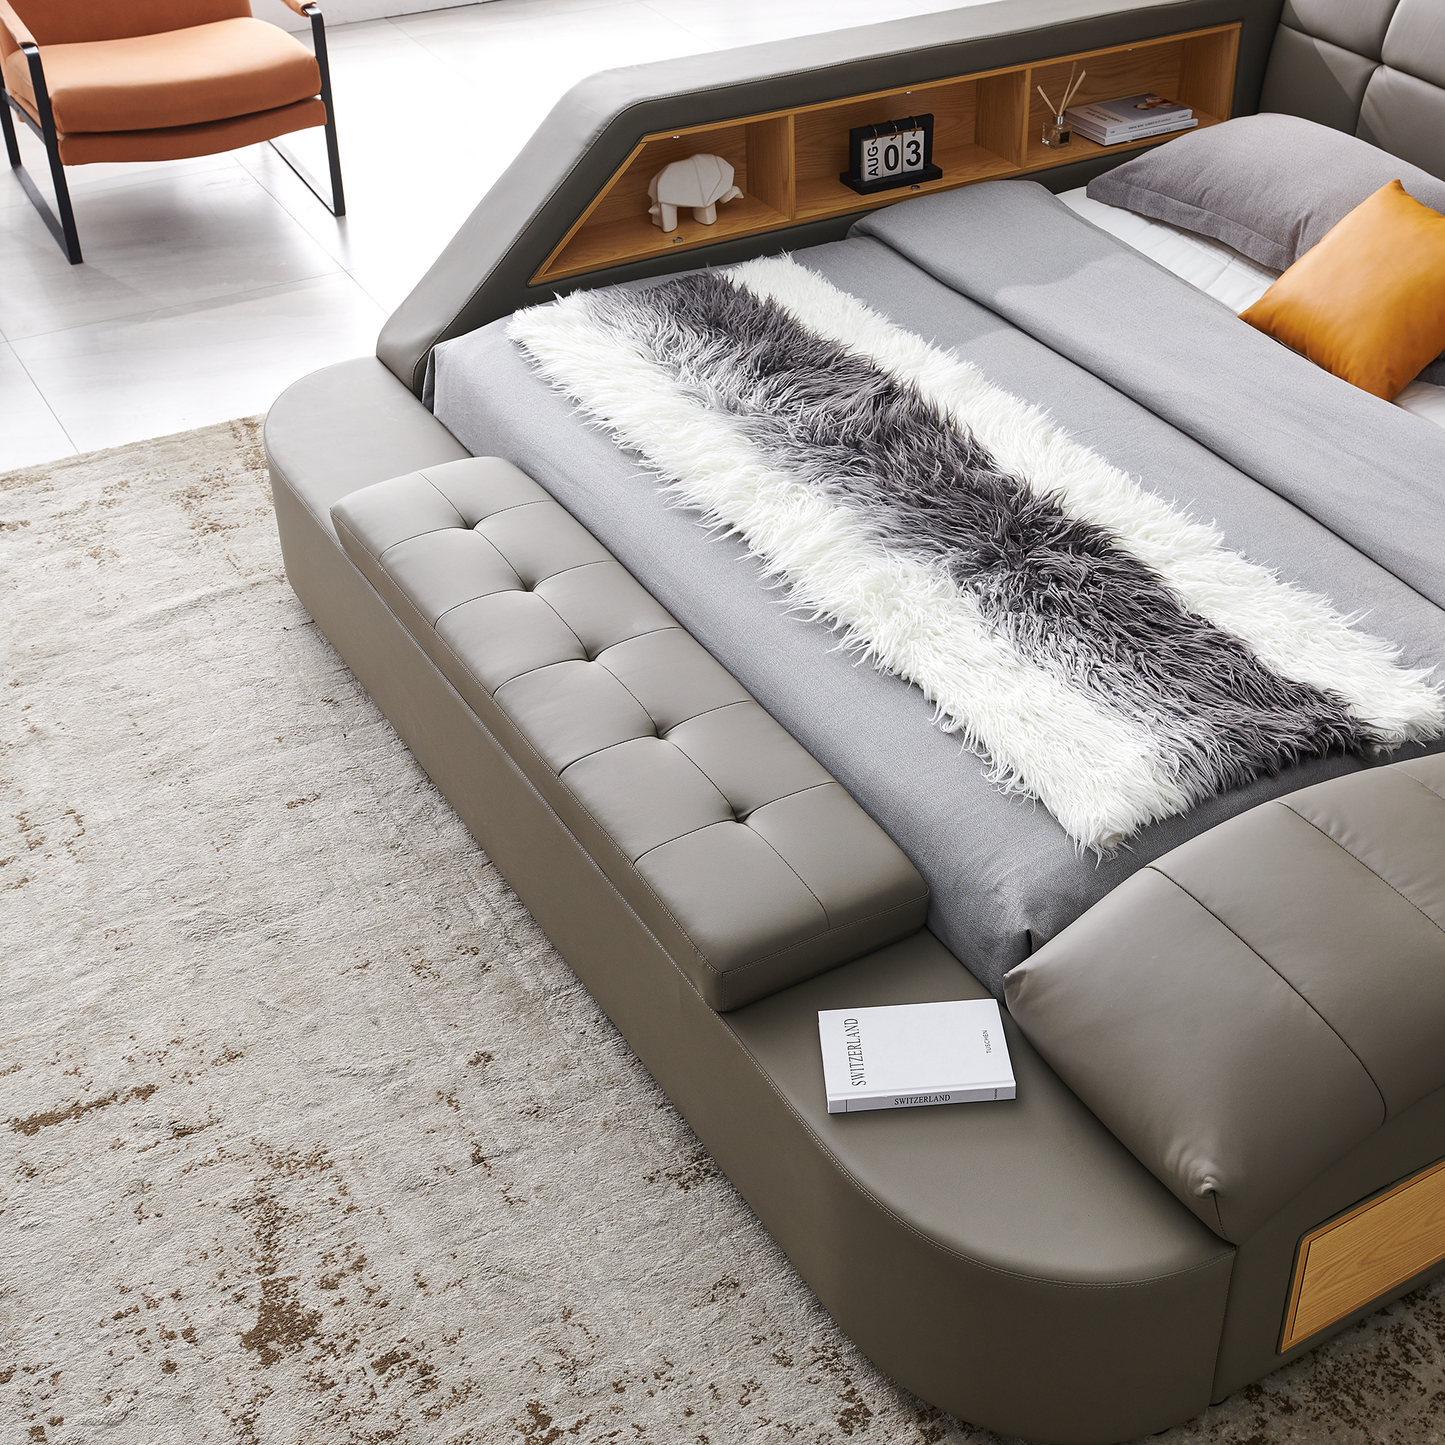 Multifunctional Upholstered Storage Bed Frame, Massage Chaise Lounge on Right, King Size, Grey